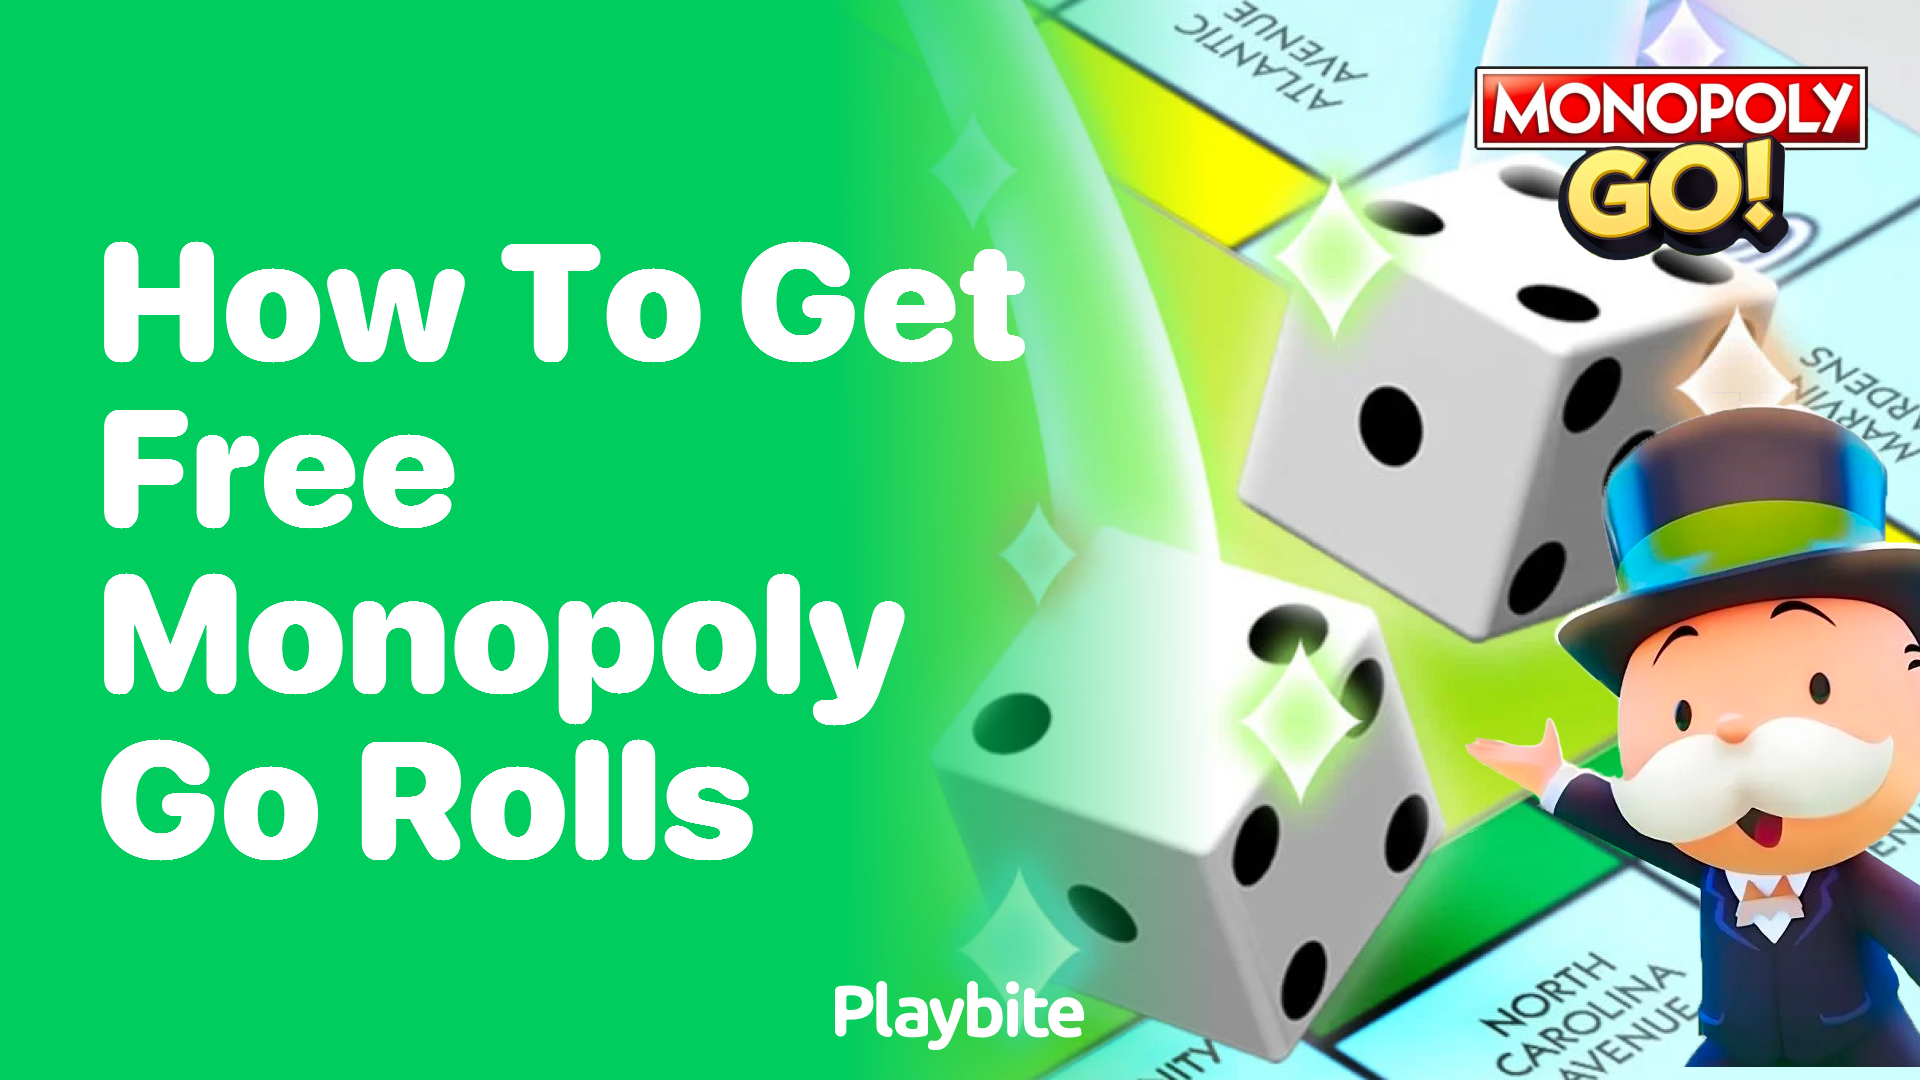 How to Get Free Monopoly Go Rolls: Unlock the Fun!